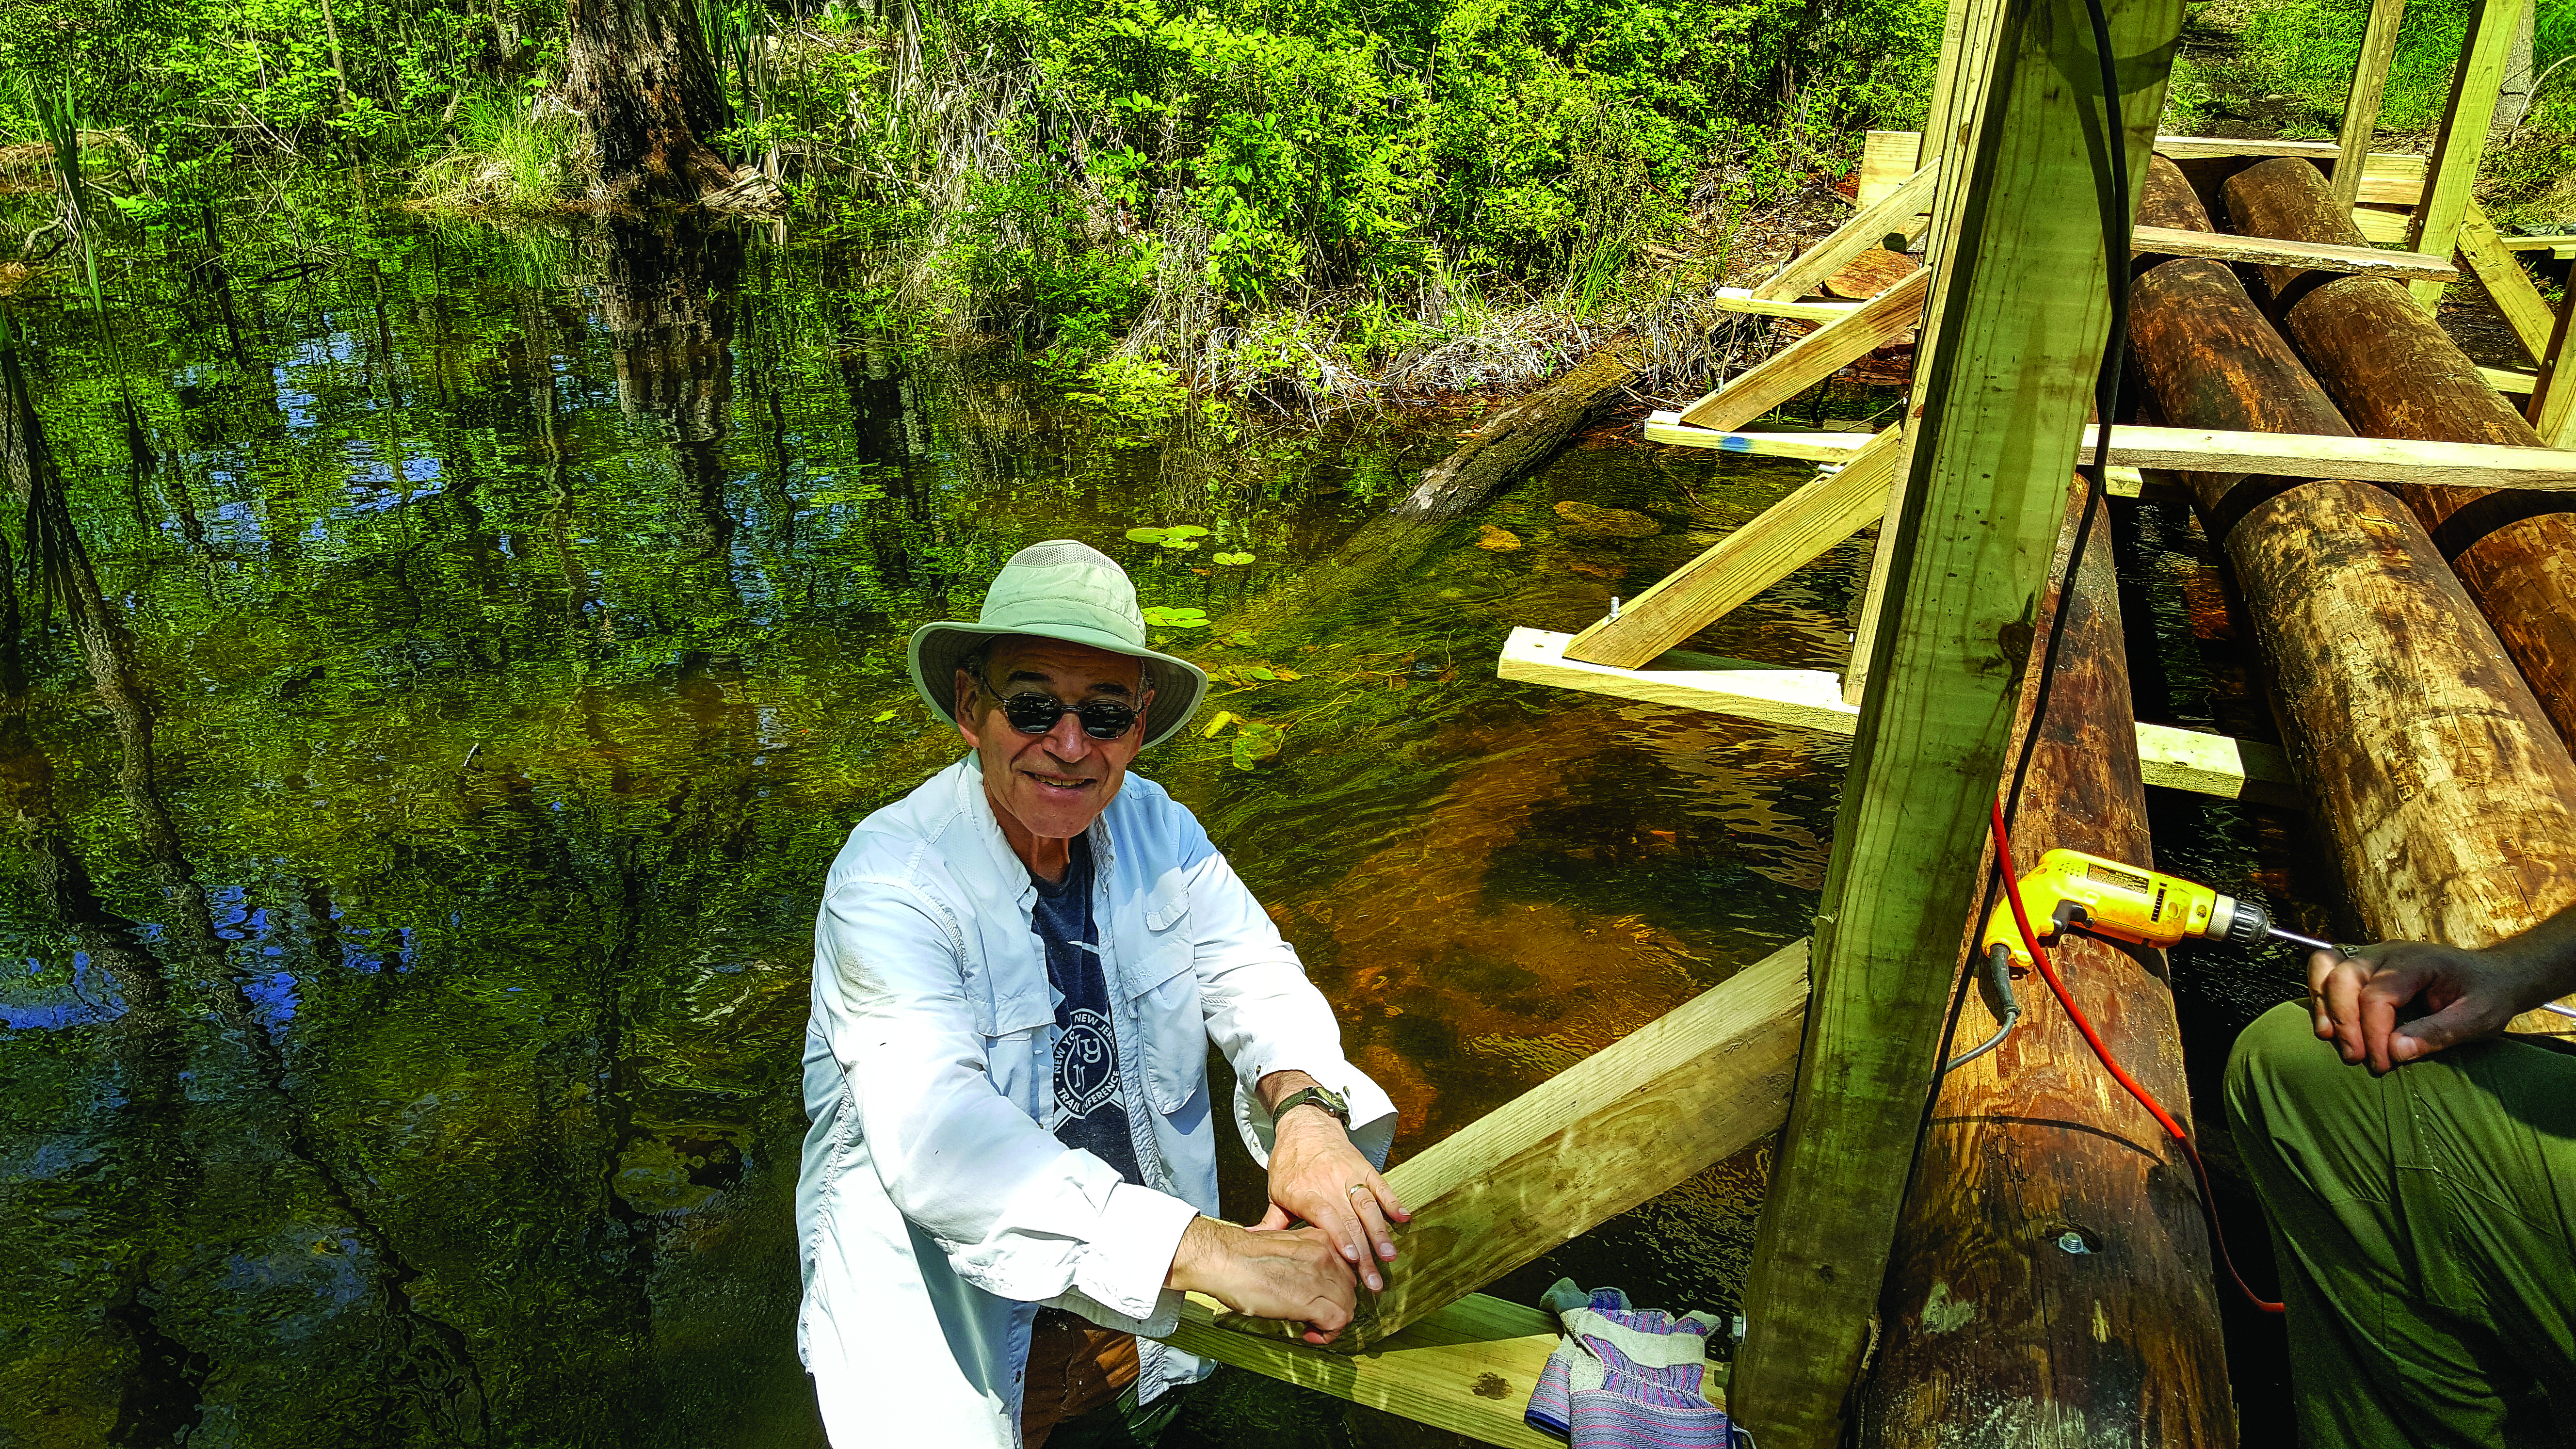 Trail Conference member Bob Gurian worked on the Crom Pond bridge. Photo credit: Jane Daniels.